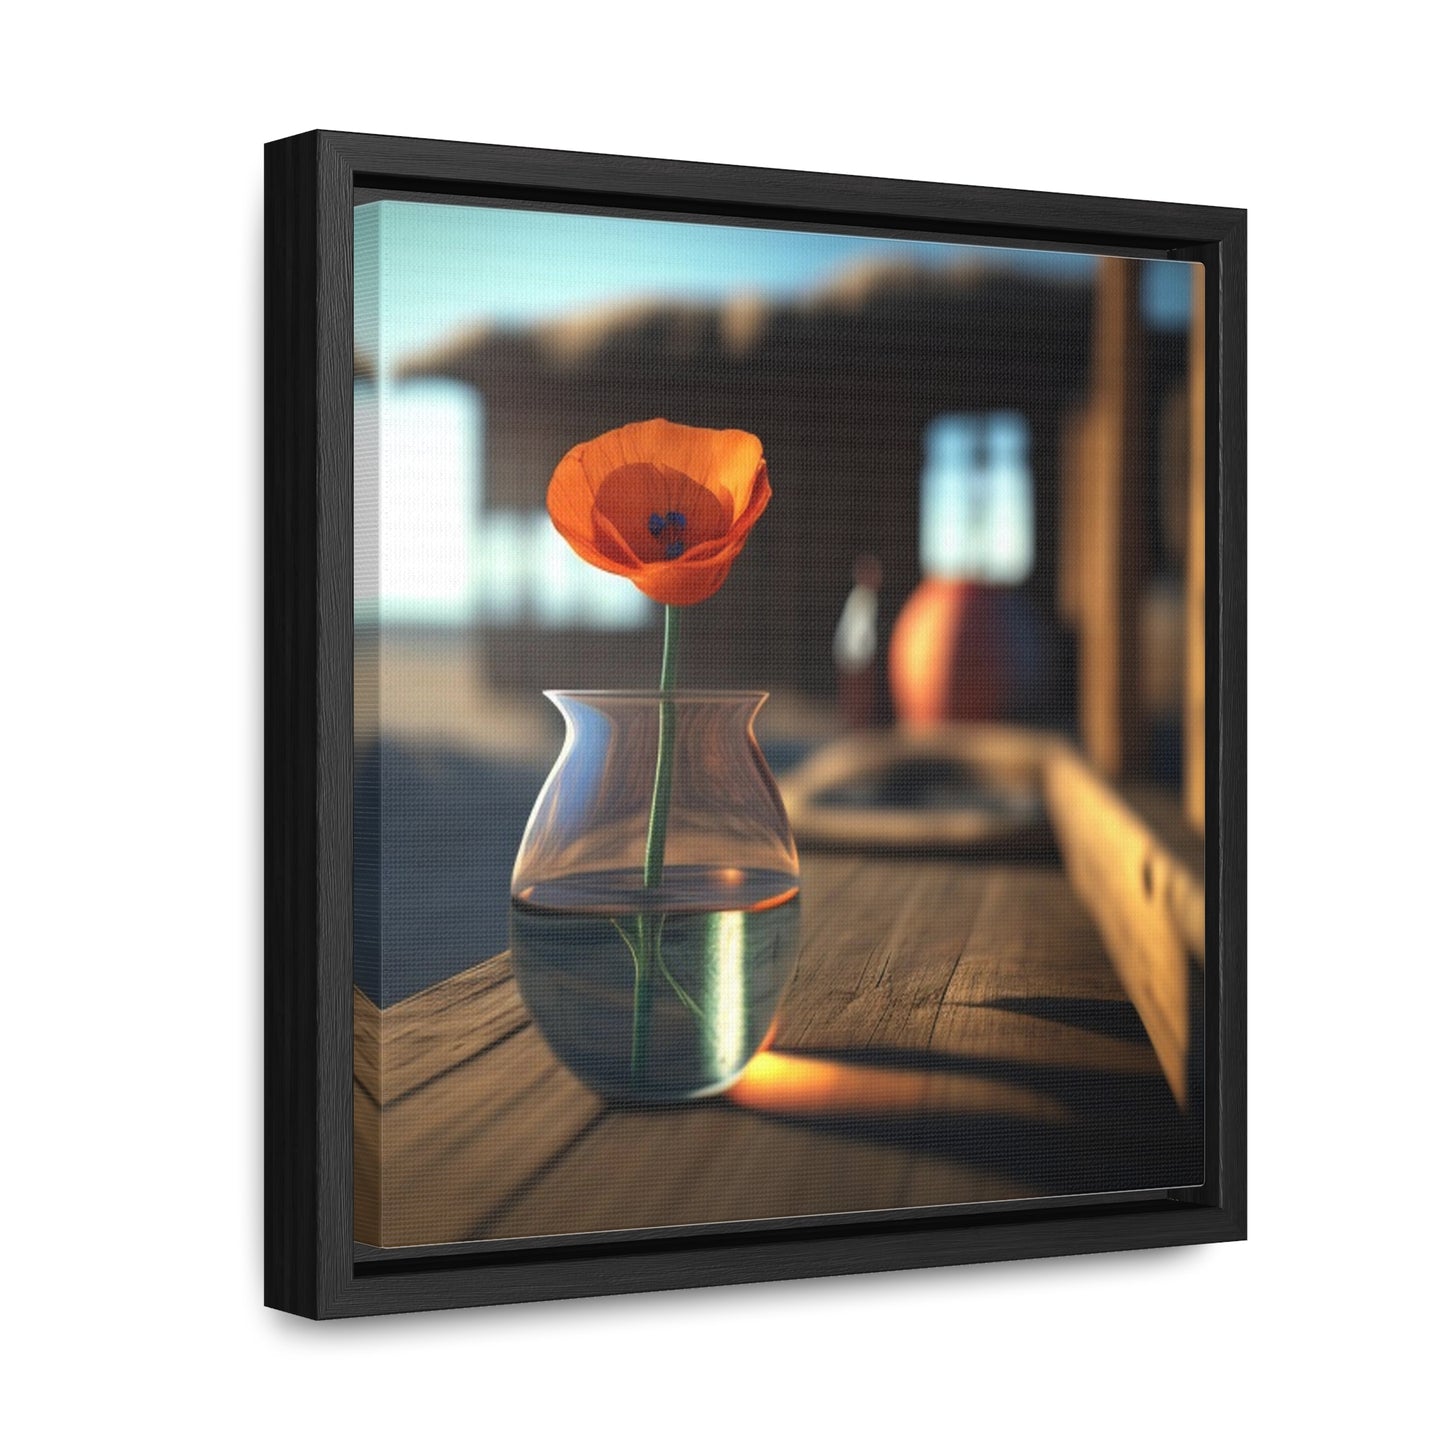 Gallery Canvas Wraps, Square Frame Poppy in a Glass Vase 2